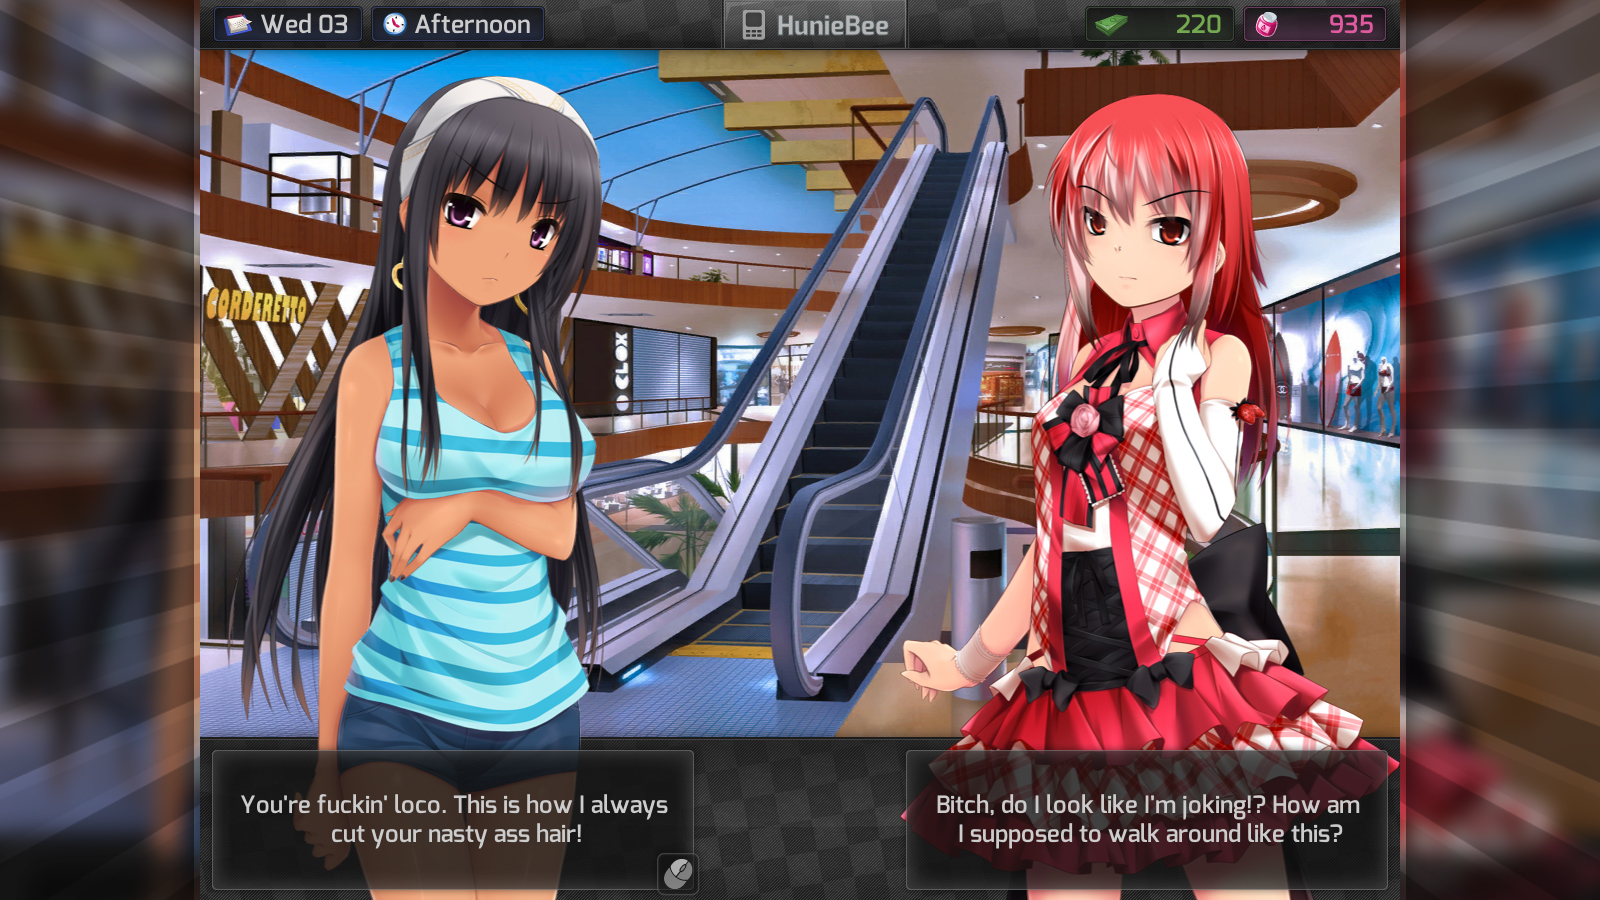 anthony vanderhorst recommends how to uncensor huniepop pic